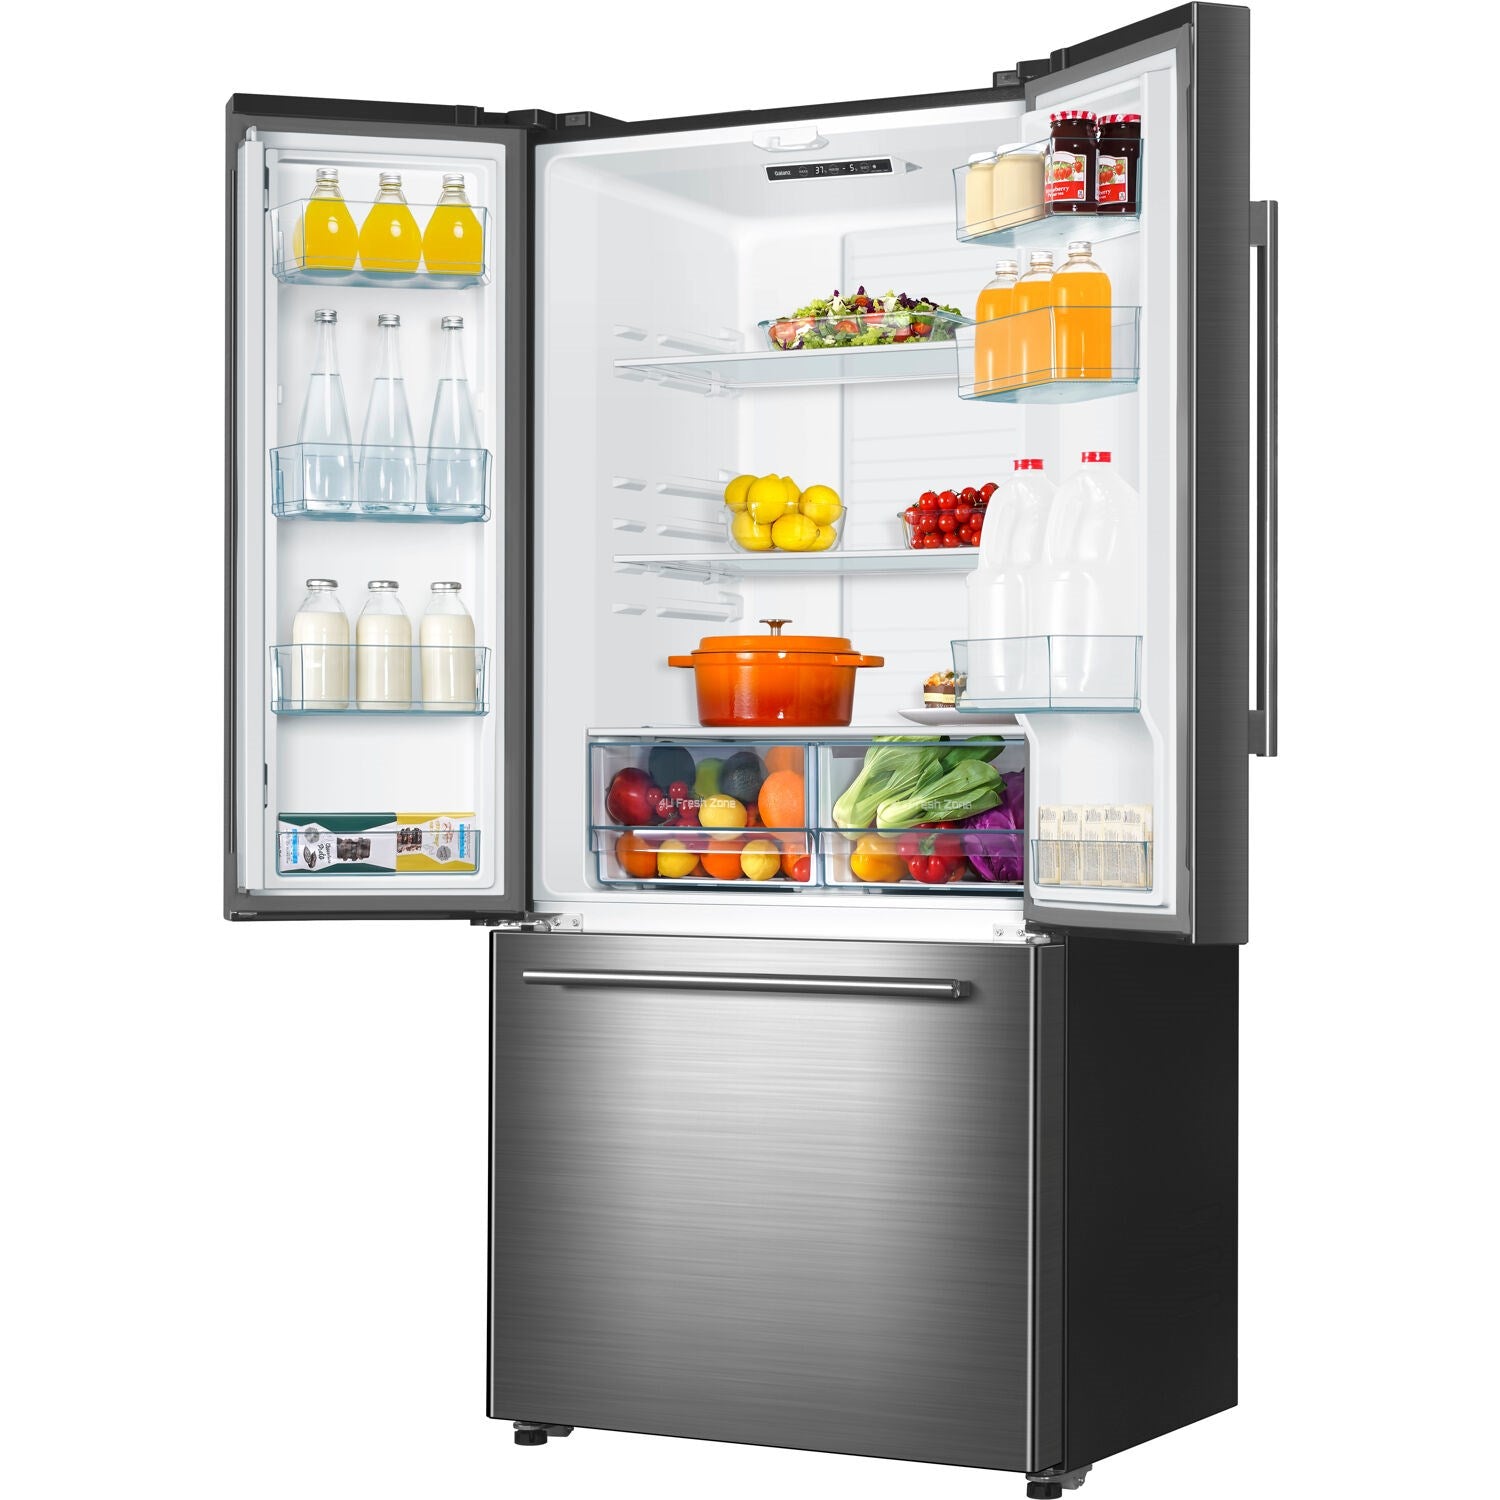 GLR16FS2K16 by Galanz - Galanz 16 Cu Ft 3 Door French Door Refrigerator  with Built-in Ice Maker in Stainless Steel